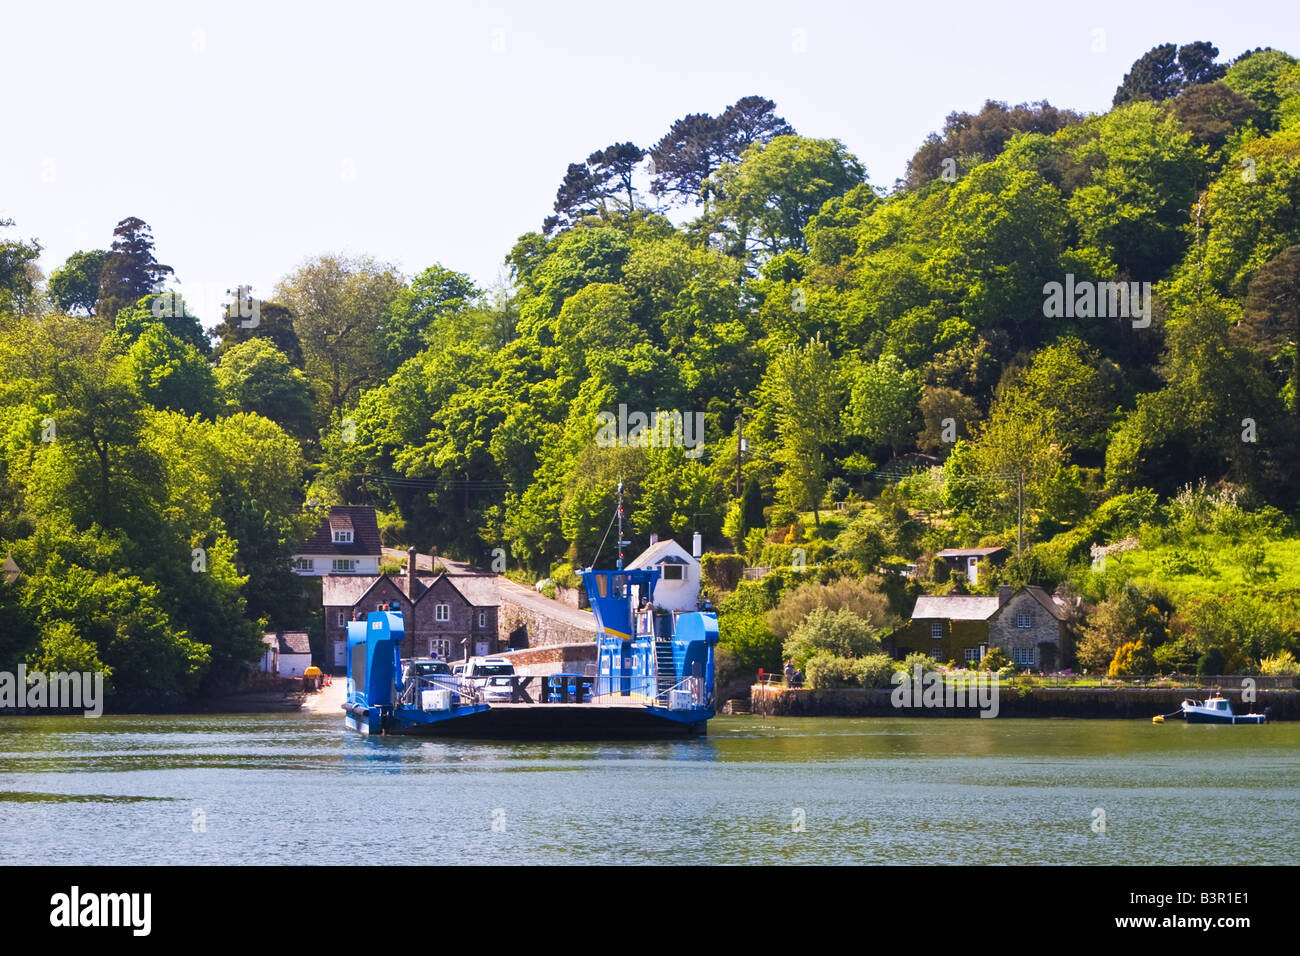 King Harry Chain Ferry, river Fal, connects St Mawes to the Roseland Peninsula with Feock, Truro Cornwall Great Britain UK 2008 Stock Photo